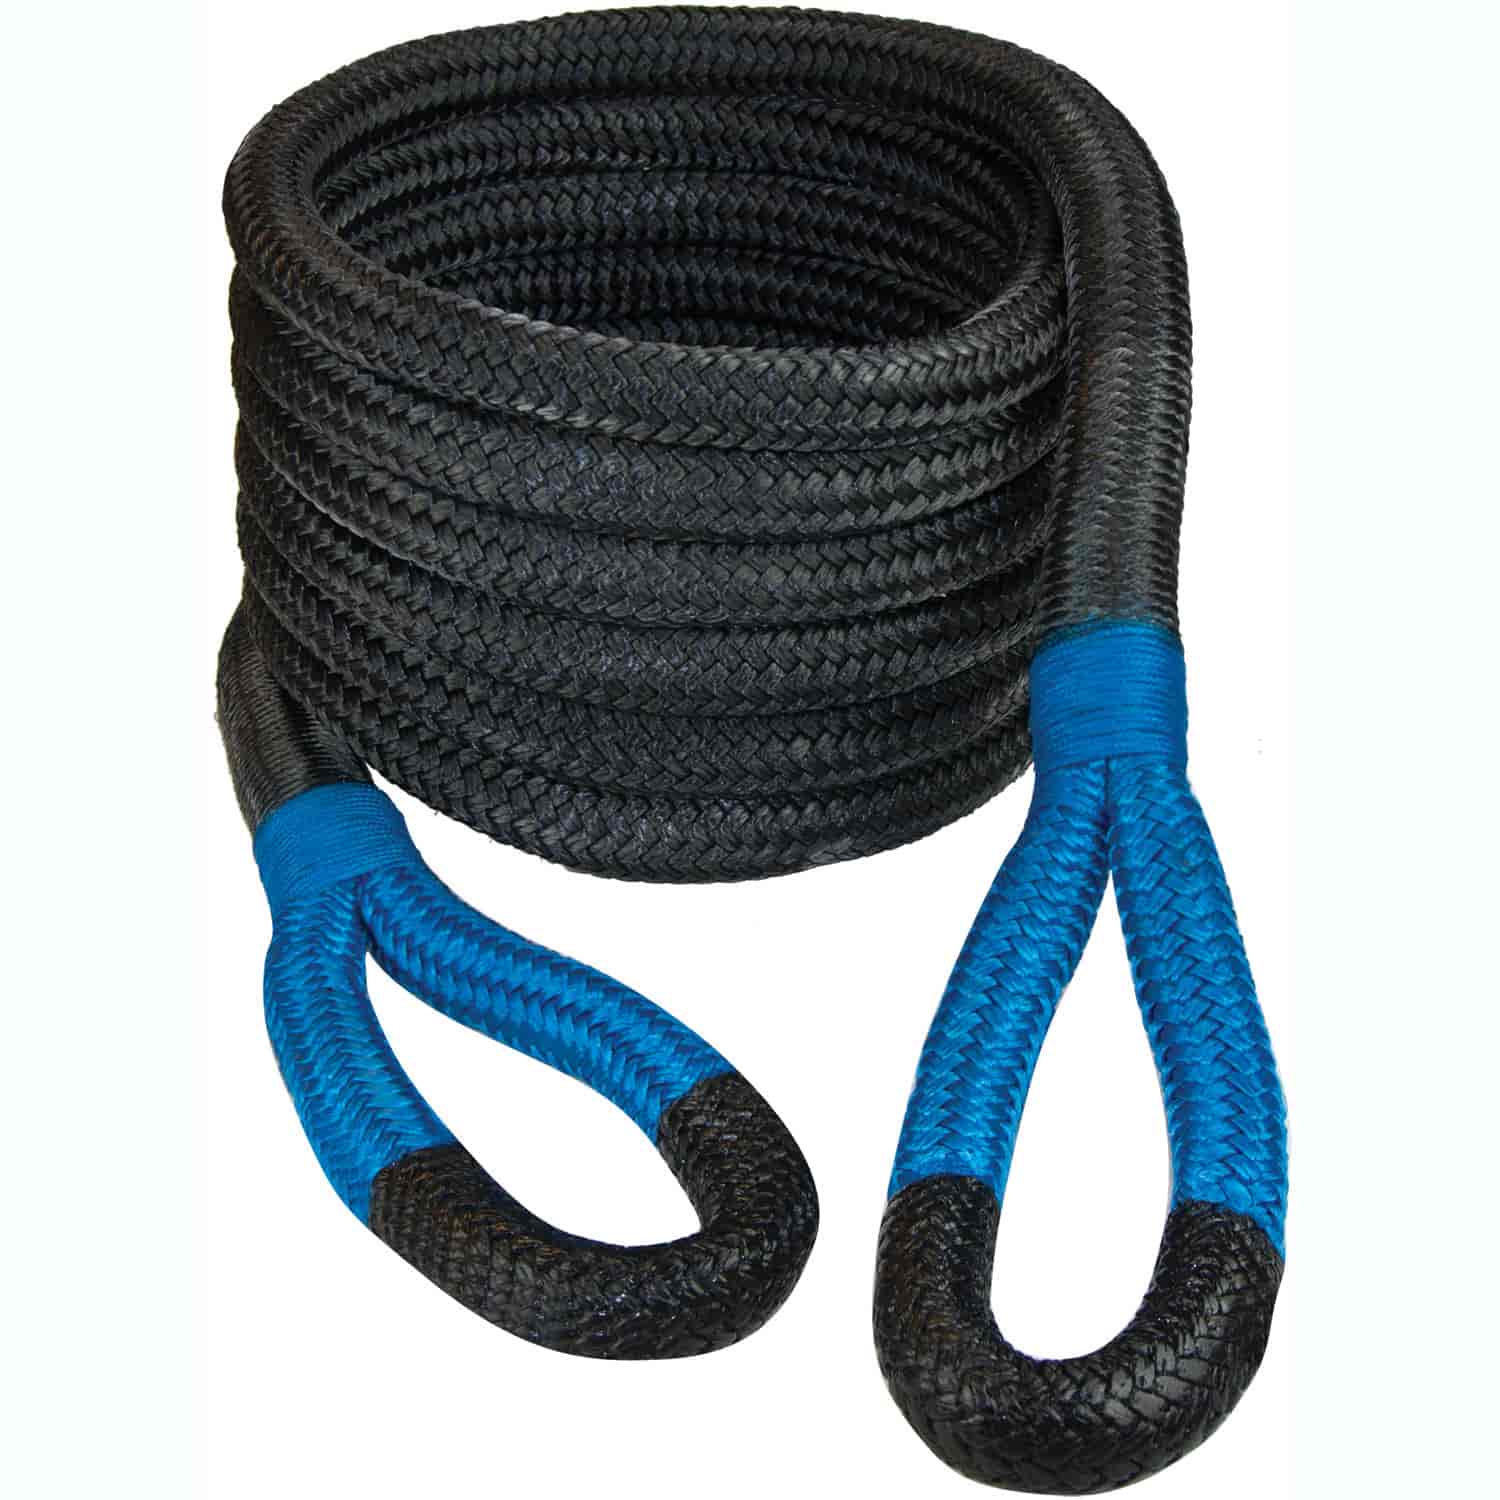 Recovery Rope 7/8" X 20' Black Rope with Blue Eyes